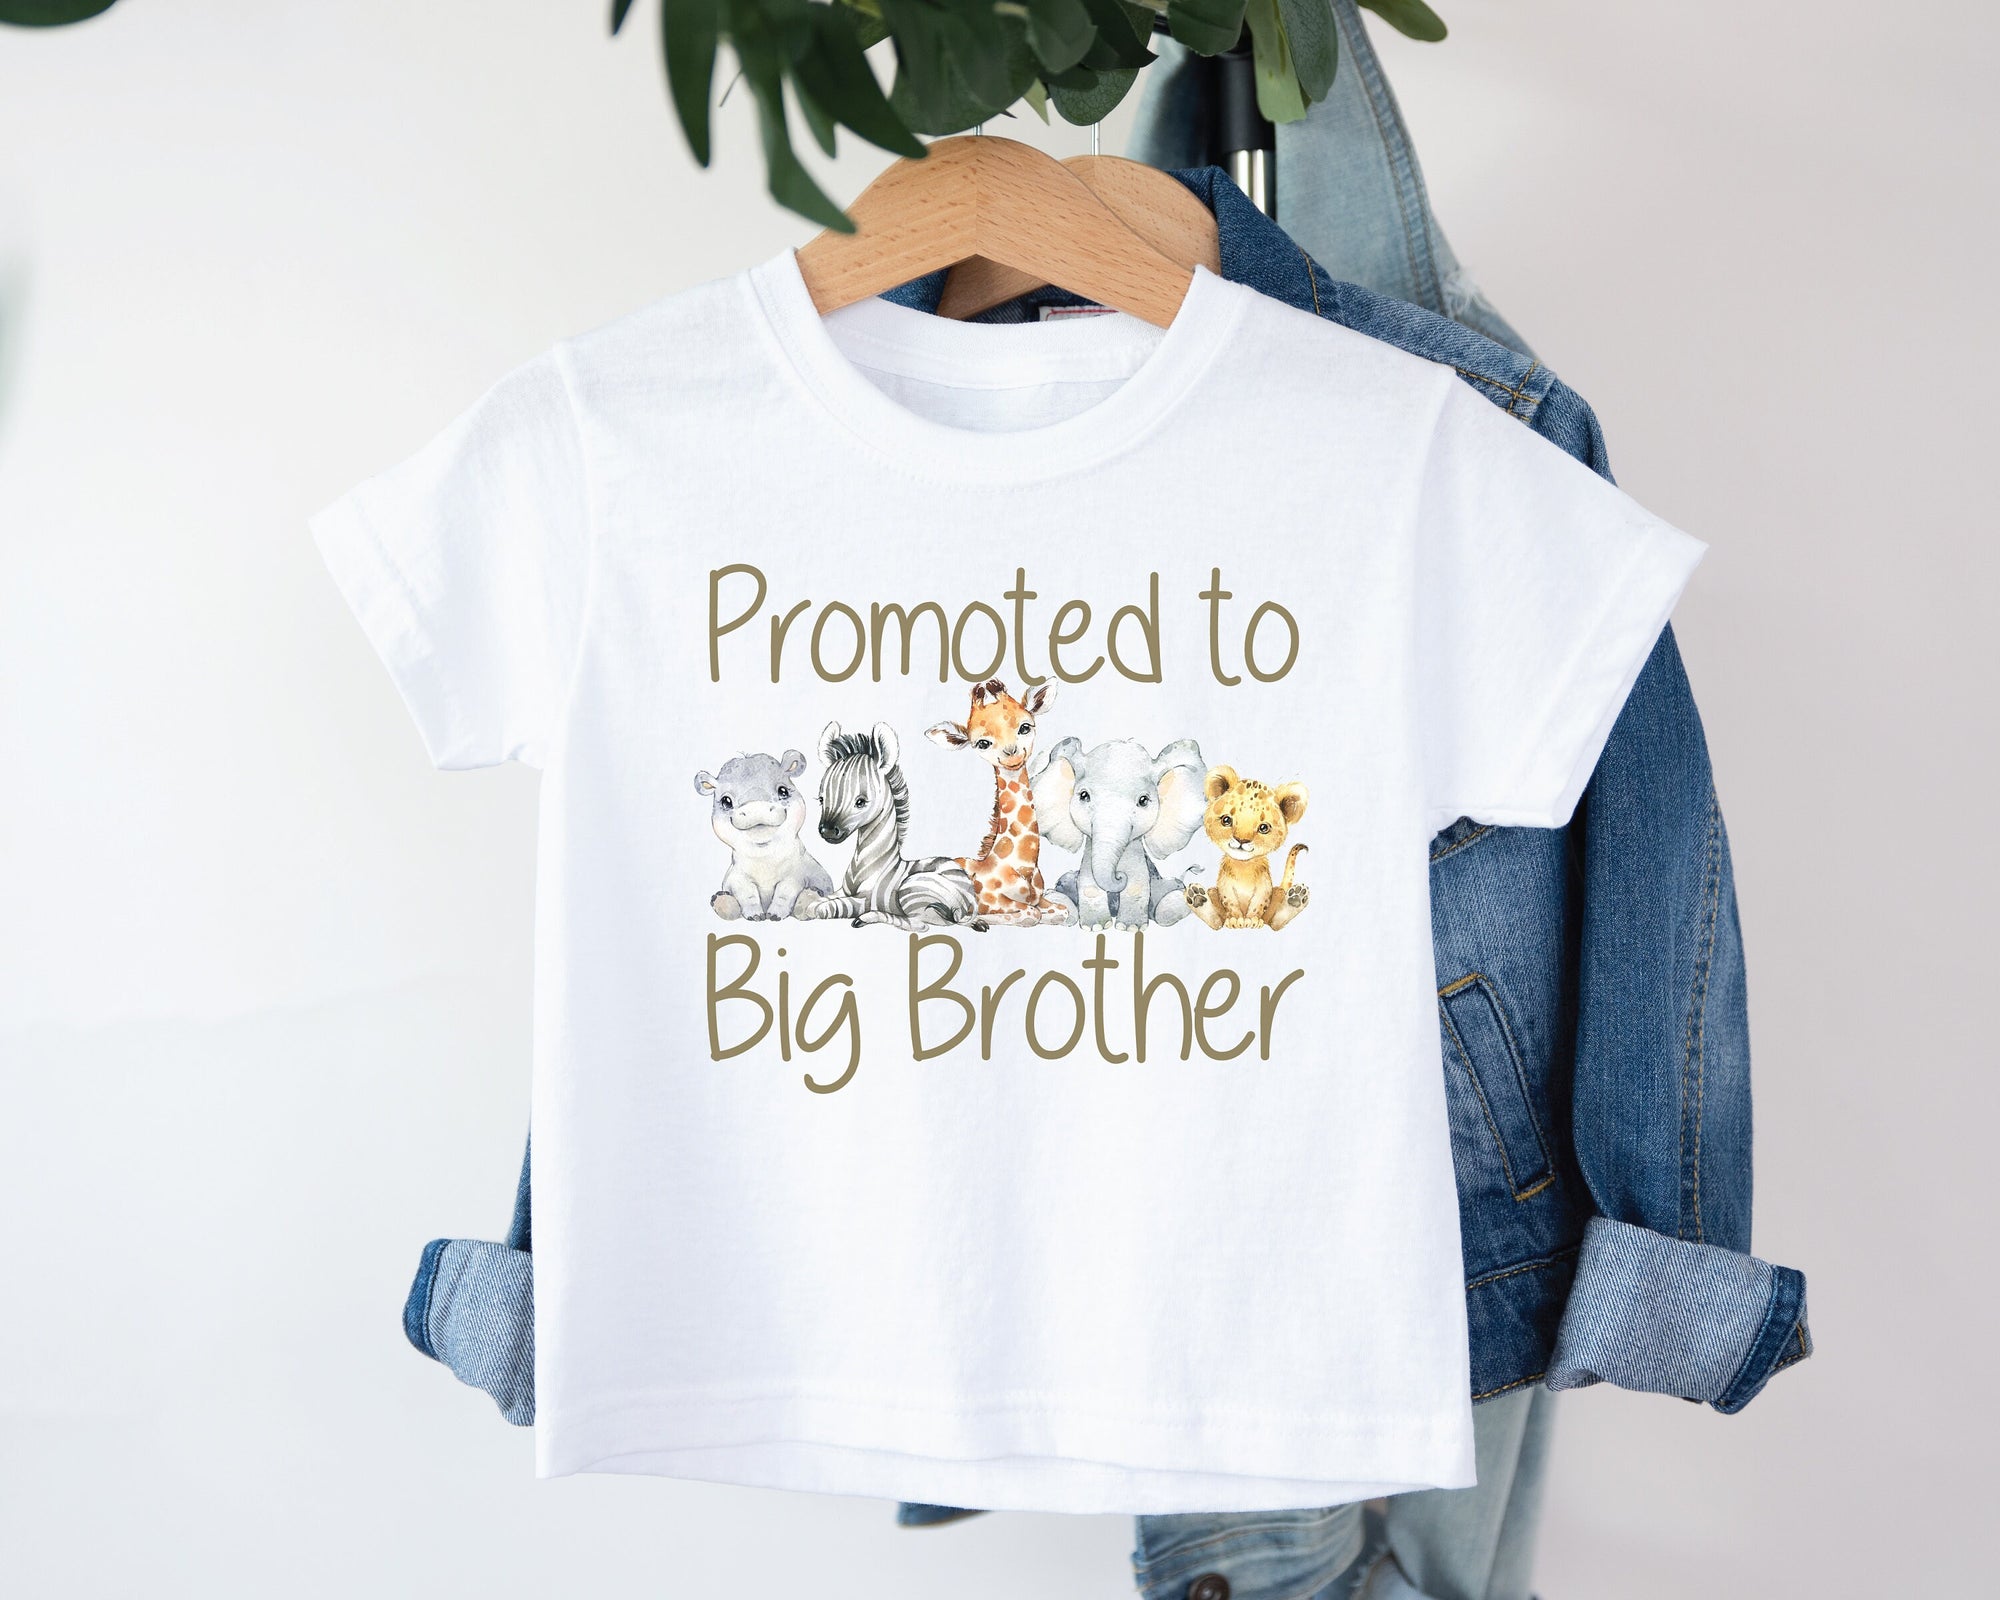 Promoted To Big Brother T-Shirt, Baby Safari Animals, Big Brother Shirt, Big Bro Tee, Pregnancy Announcement, I'm Going To Be A Big Brother